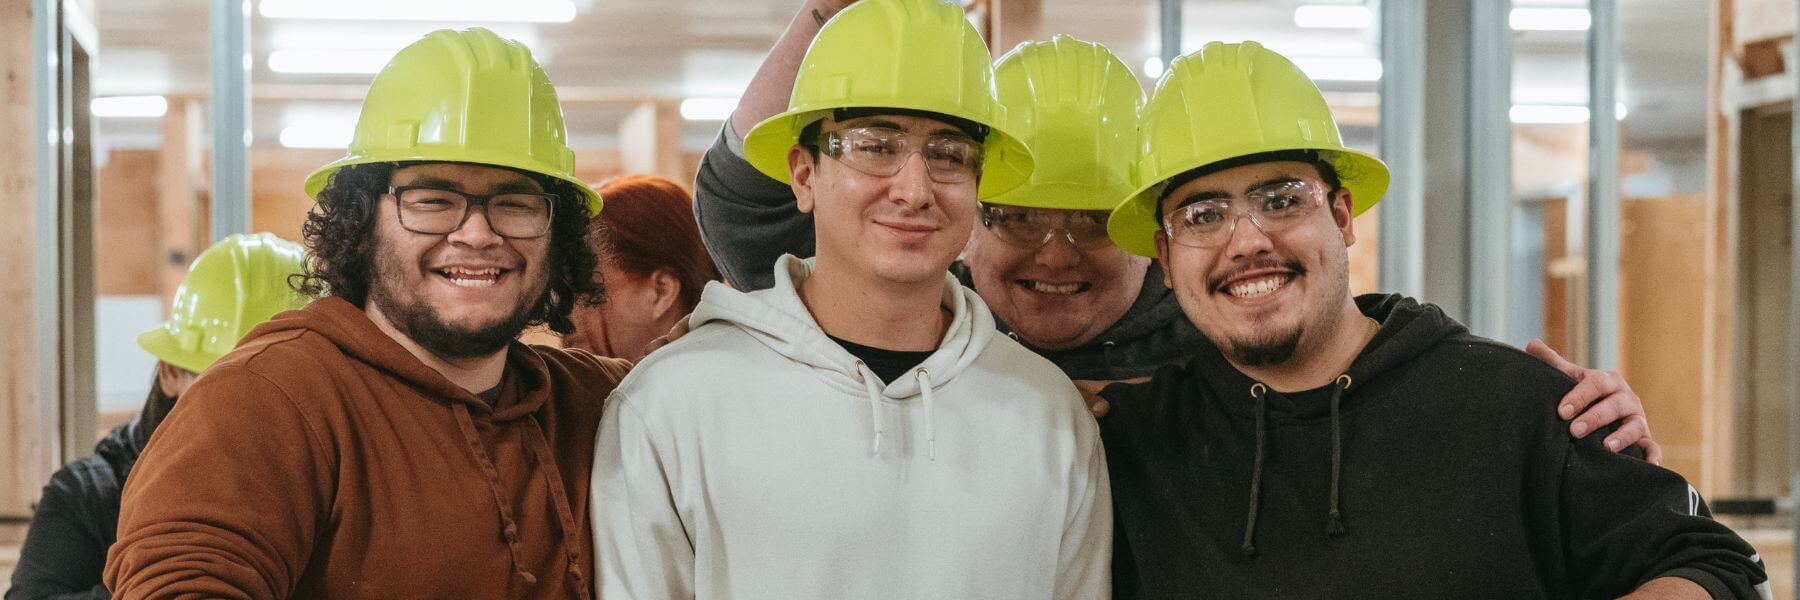 Highschoolers in hard hats at the WAVE tour